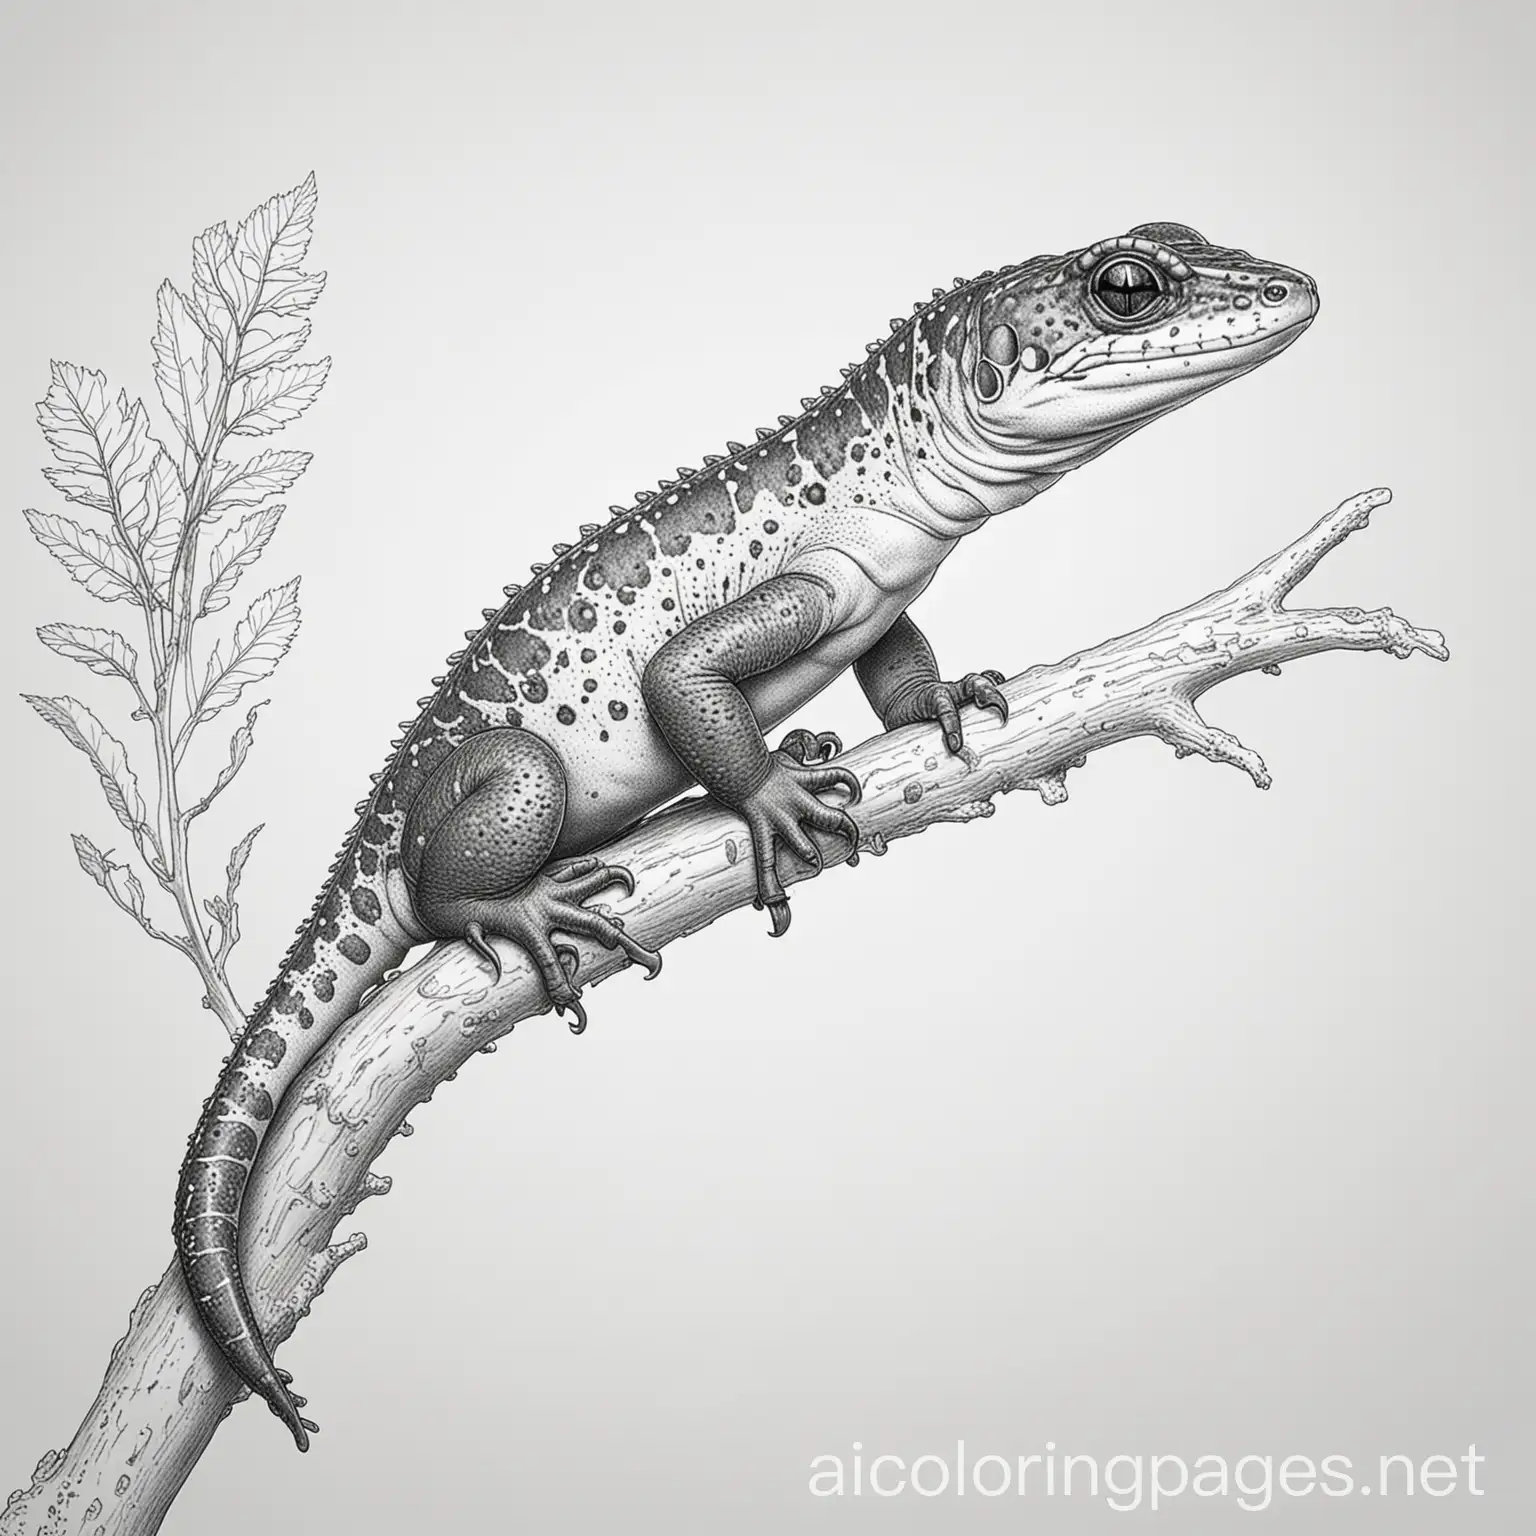 A salamander on a branch, Coloring Page, black and white, line art, white background, Simplicity, Ample White Space. The background of the coloring page is plain white to make it easy for young children to color within the lines. The outlines of all the subjects are easy to distinguish, making it simple for kids to color without too much difficulty